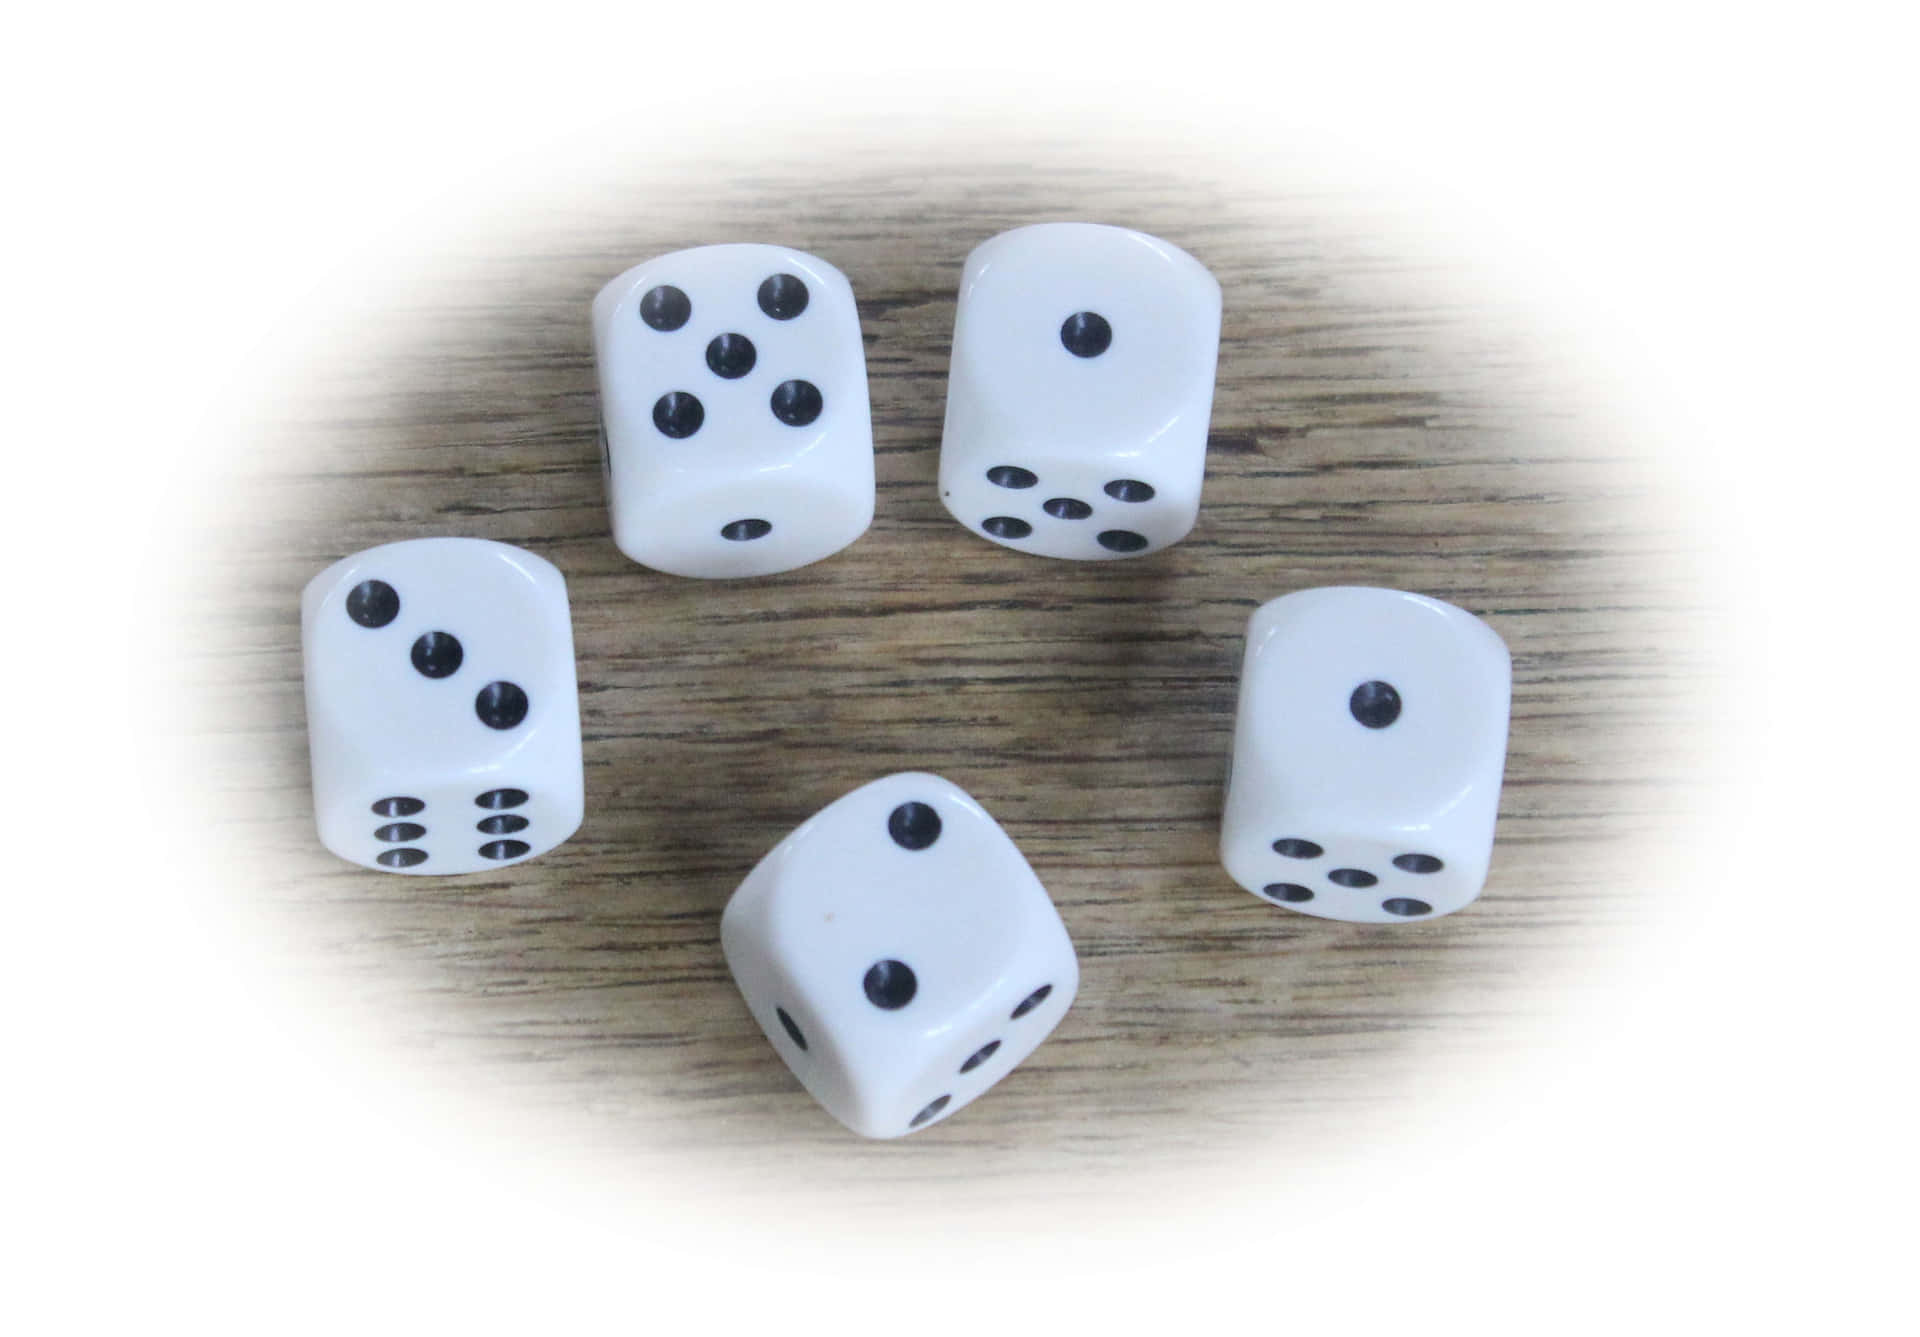 Roll the dice - the possibilities are limitless!